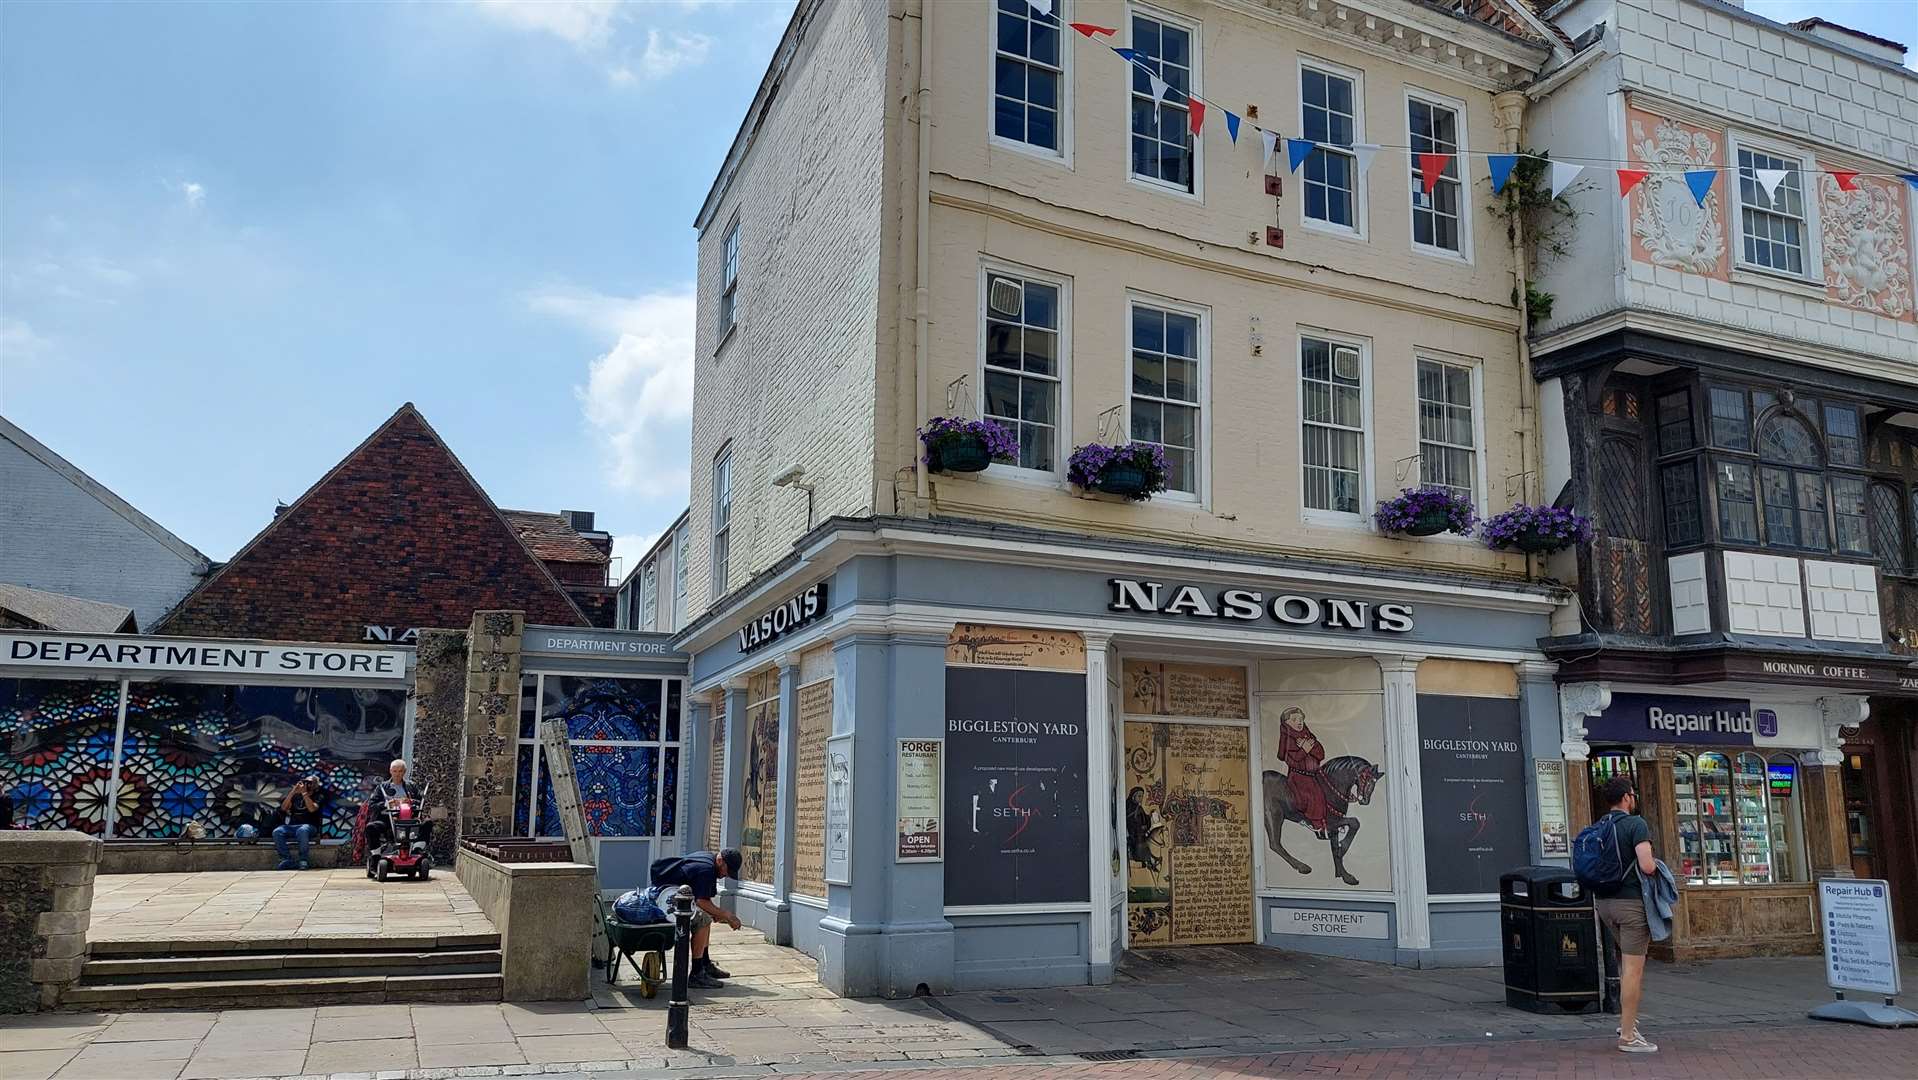 How the former Nasons store in Canterbury city centre looks today. It has been closed for almost four years